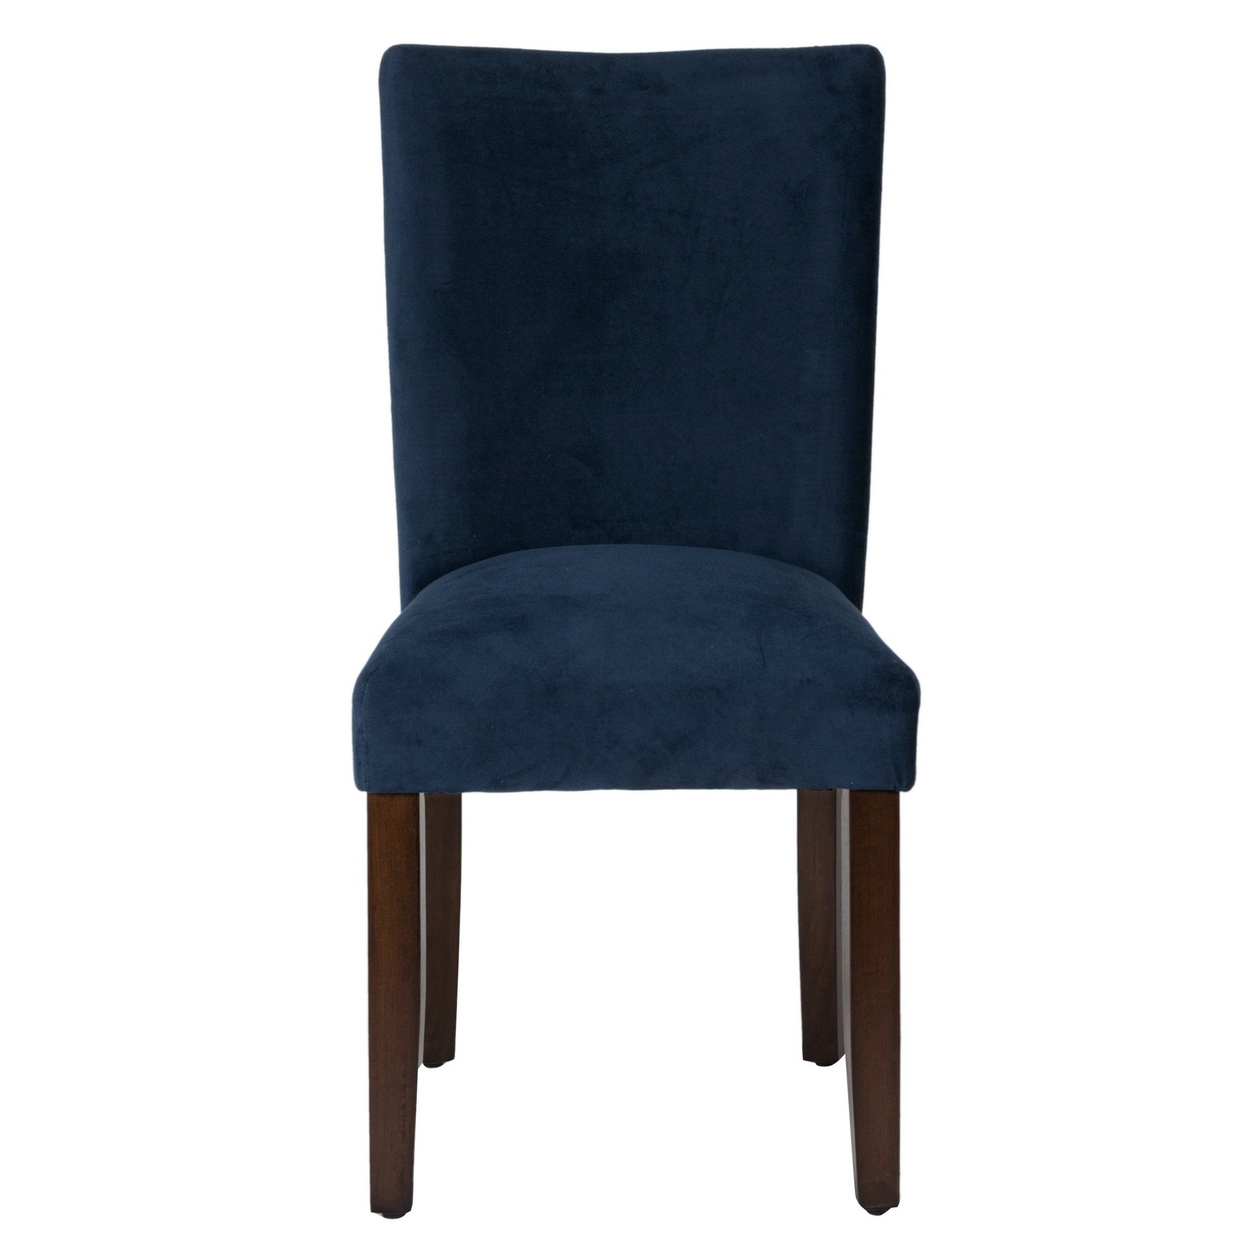 Velvet Upholstered Parsons Dining Chair With Wooden Legs, Navy Blue And Brown, Set Of Two- Saltoro Sherpi